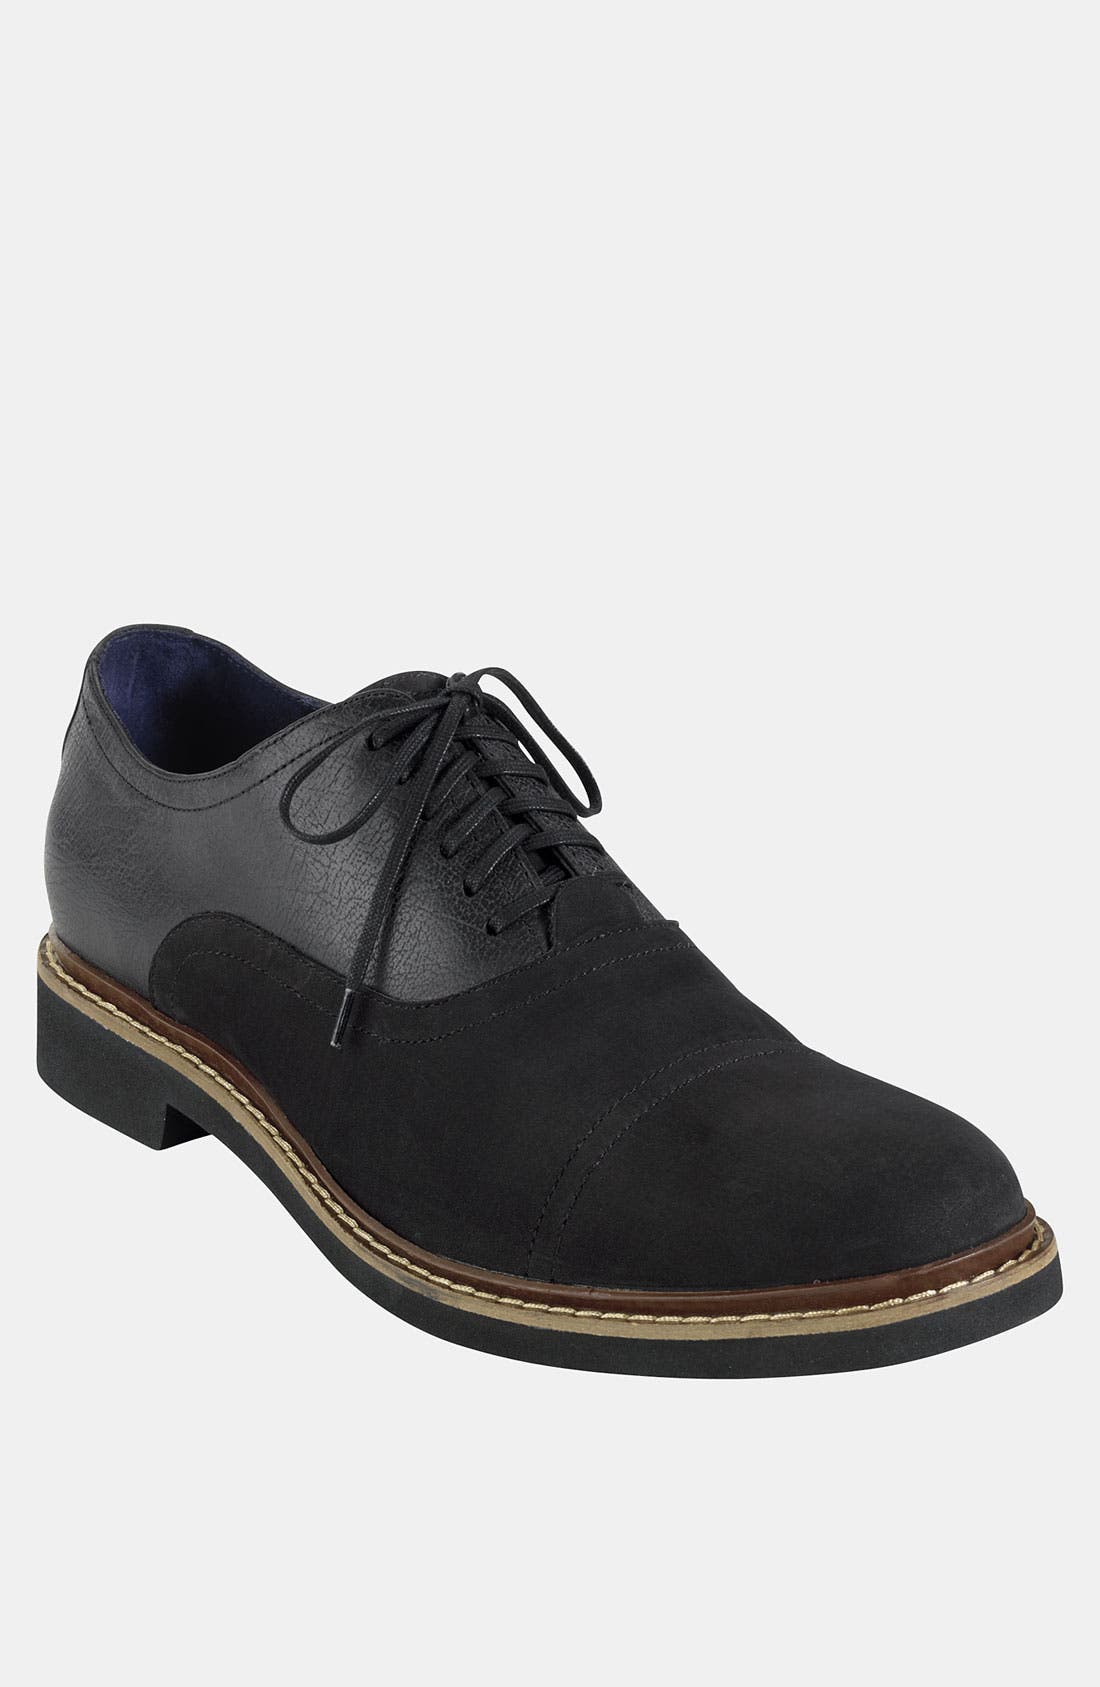 nordstrom mens shoes cole haan